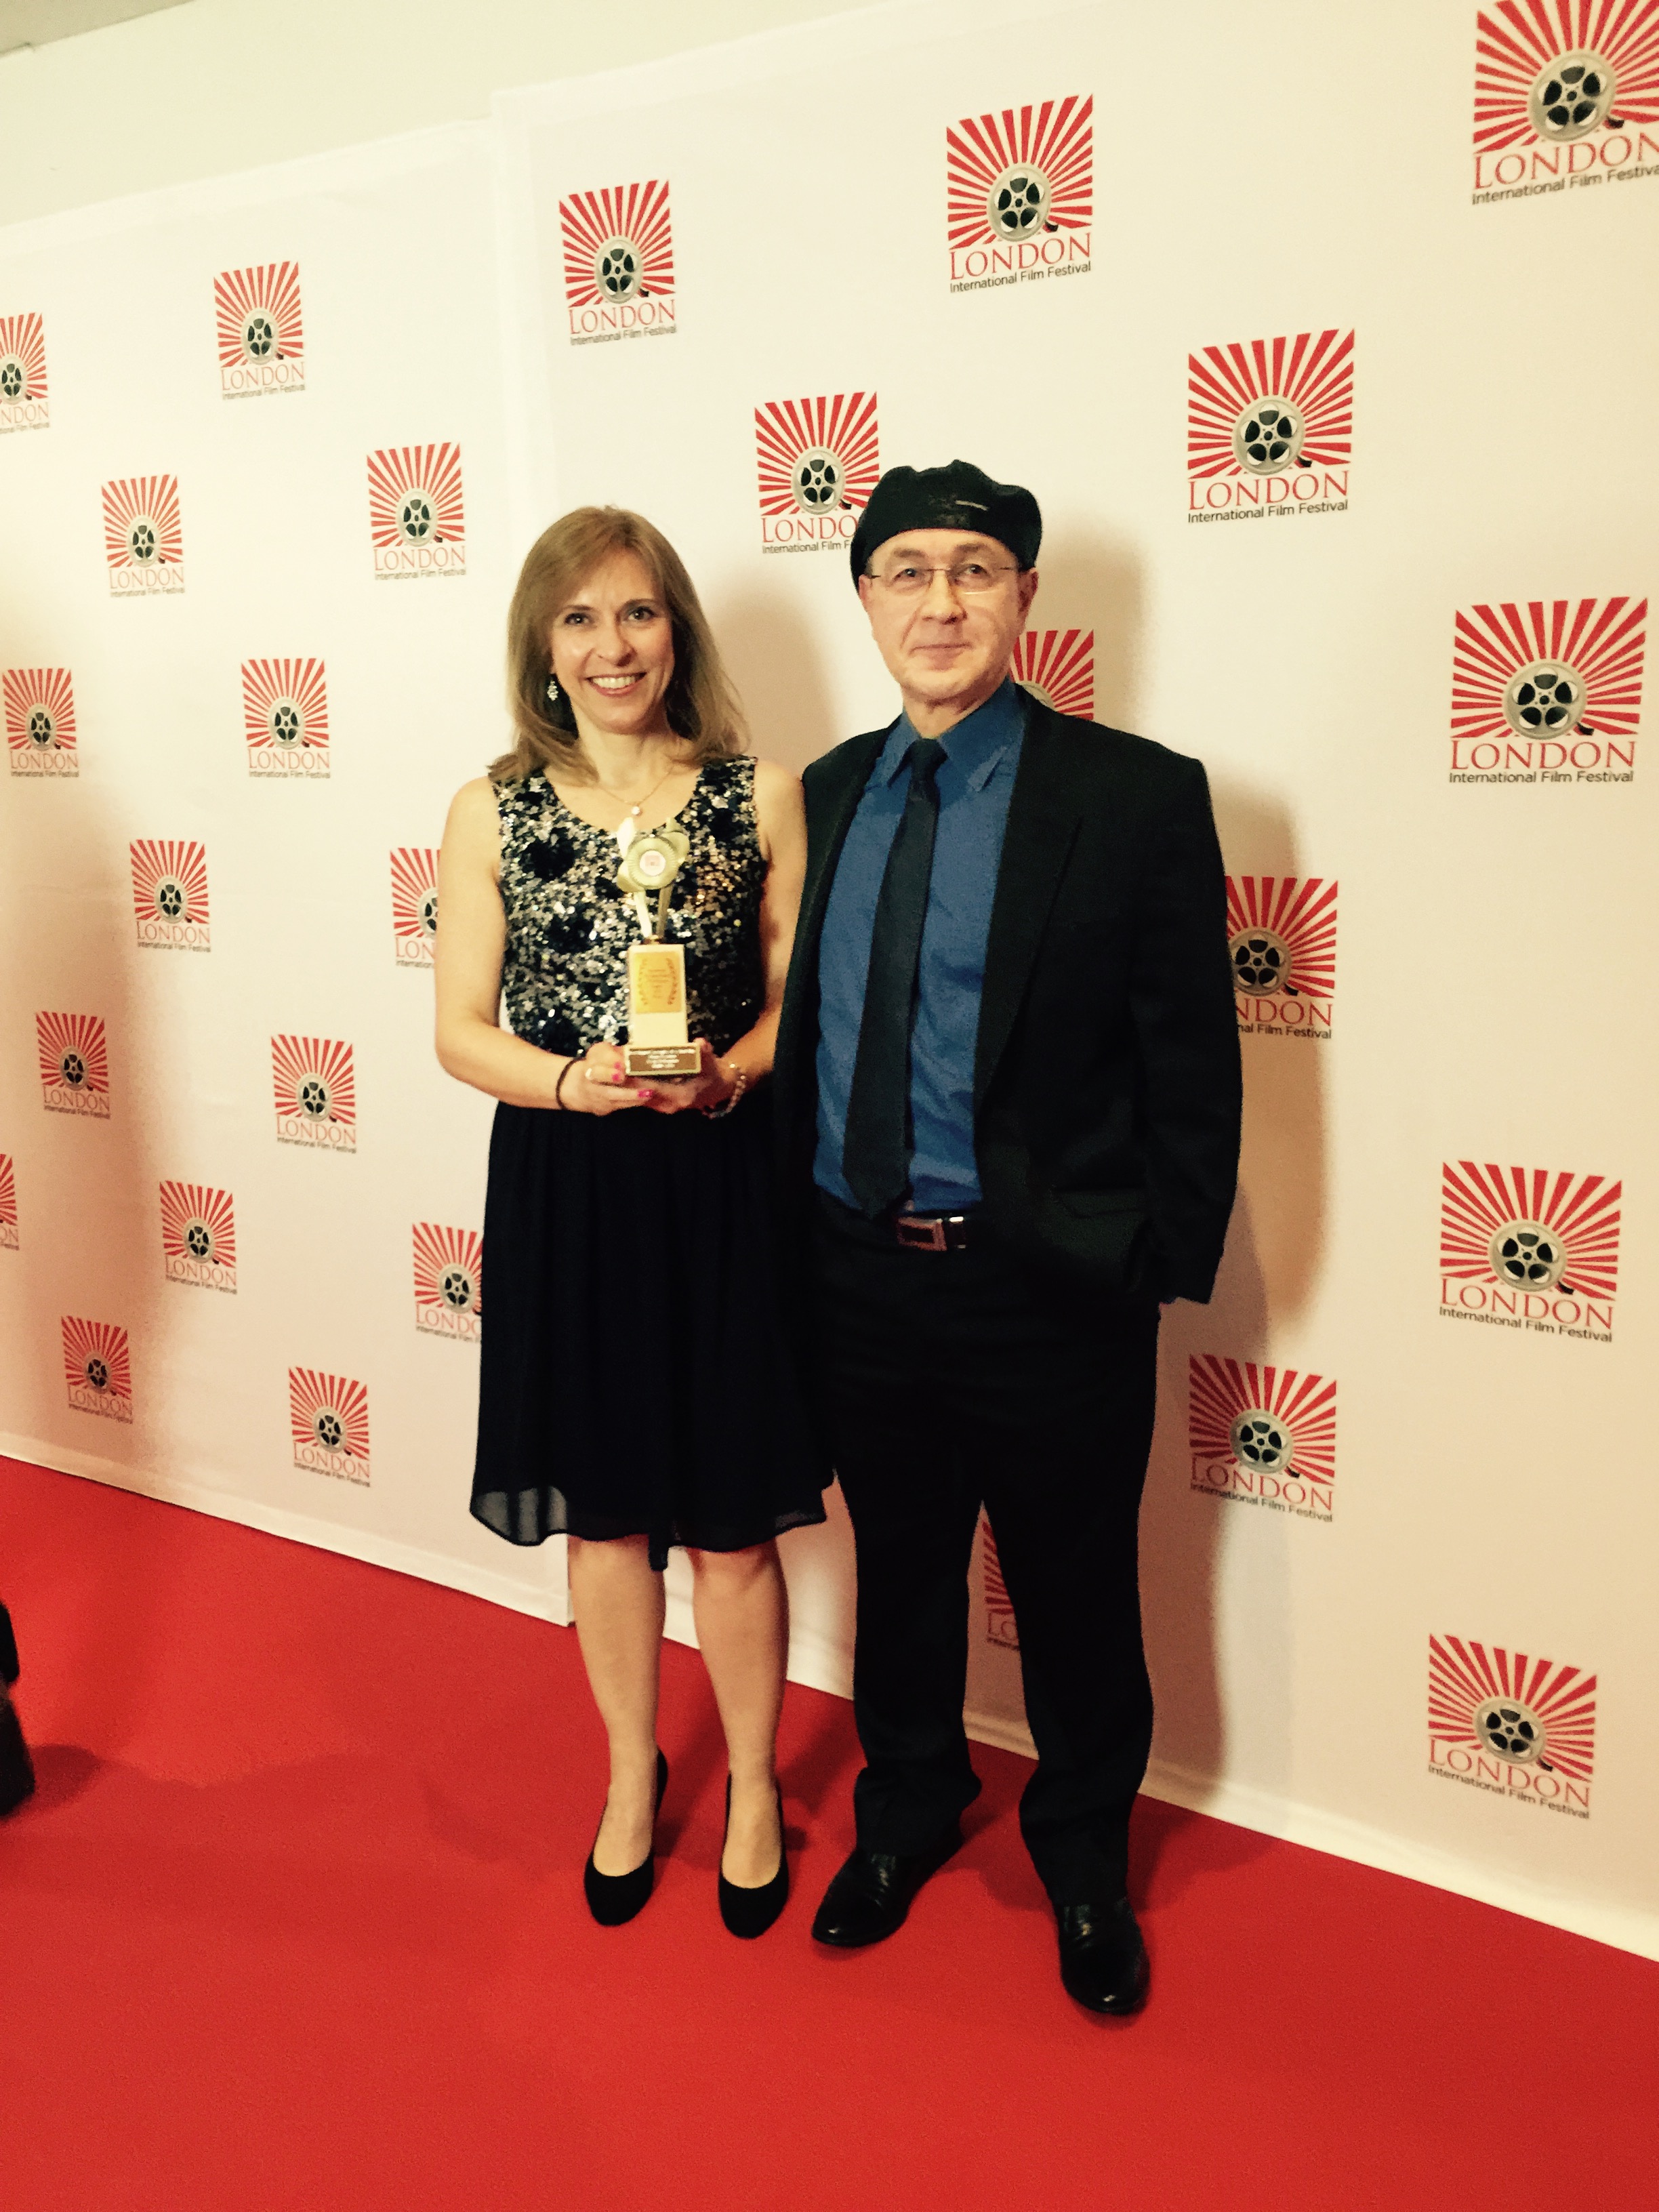 With my friend and co-writer Judith Wyler at London International Film Festival 2015. My film Chain Reaction won the award for the best original script 2015.